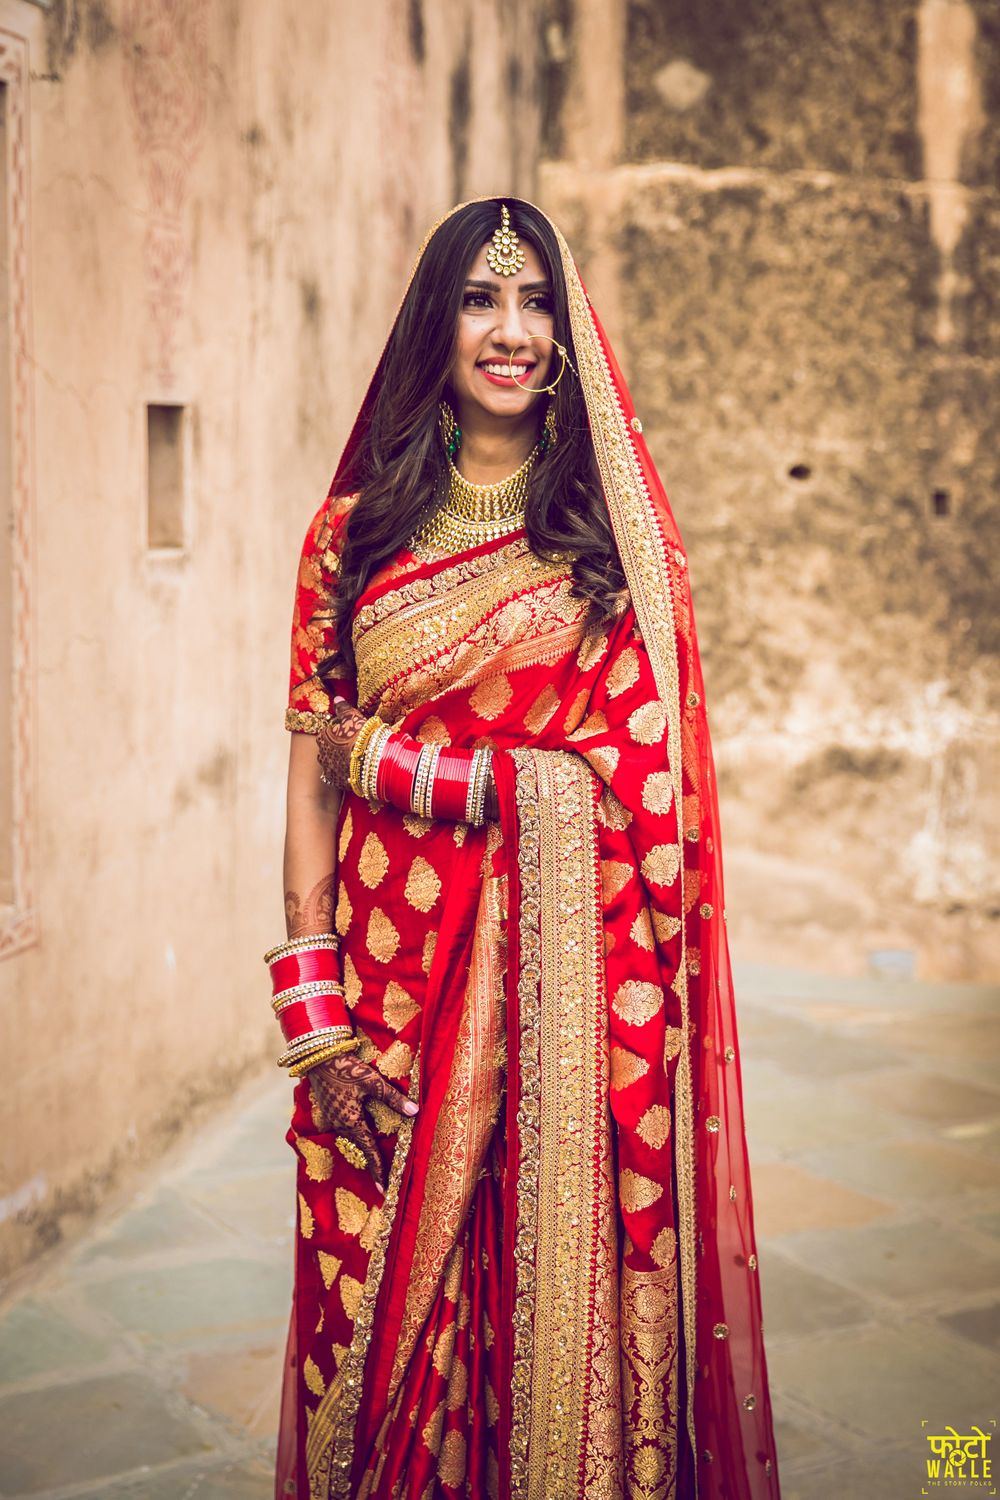 Photo of A bride in a red and gold benarasi saree on her wedding day